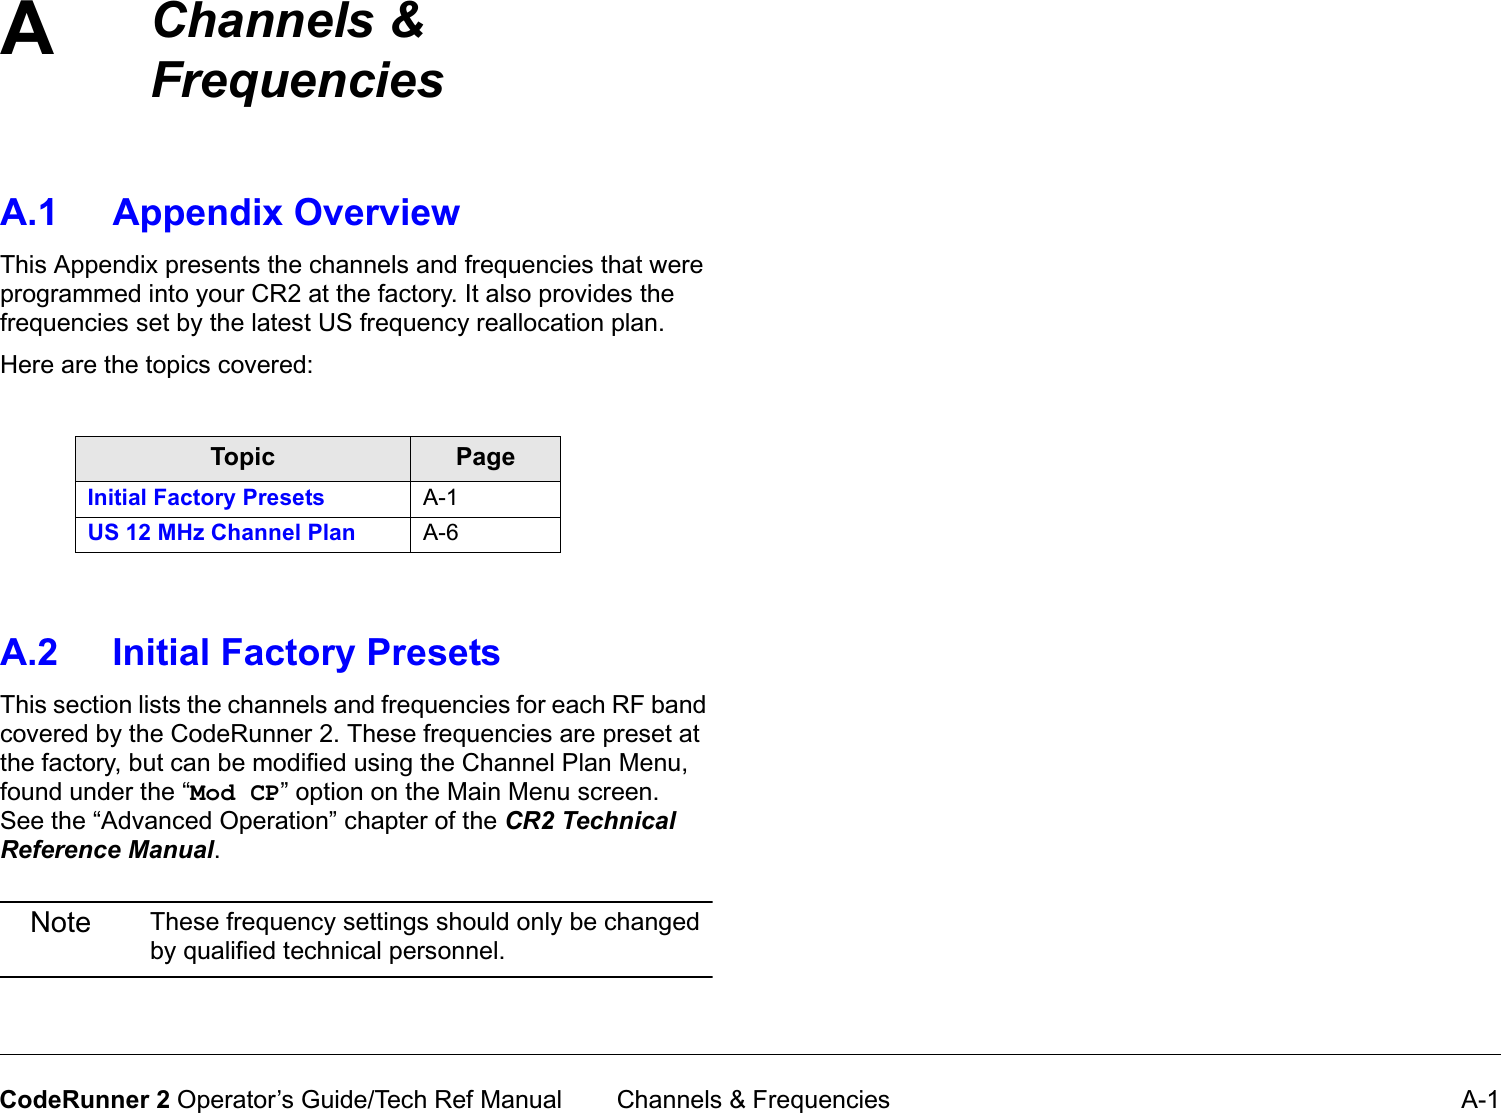 A Channels &amp; Frequencies A-1CodeRunner 2 Operator’s Guide/Tech Ref ManualChannels&amp;FrequenciesA.1 Appendix OverviewThis Appendix presents the channels and frequencies that were programmed into your CR2 at the factory. It also provides the frequencies set by the latest US frequency reallocation plan.Here are the topics covered:A.2 Initial Factory PresetsThis section lists the channels and frequencies for each RF band covered by the CodeRunner 2. These frequencies are preset at the factory, but can be modified using the Channel Plan Menu, found under the “Mod CP” option on the Main Menu screen.   See the “Advanced Operation” chapter of the CR2TechnicalReferenceManual.Note These frequency settings should only be changed by qualified technical personnel.Topic PageInitial Factory Presets A-1US 12 MHz Channel Plan A-6